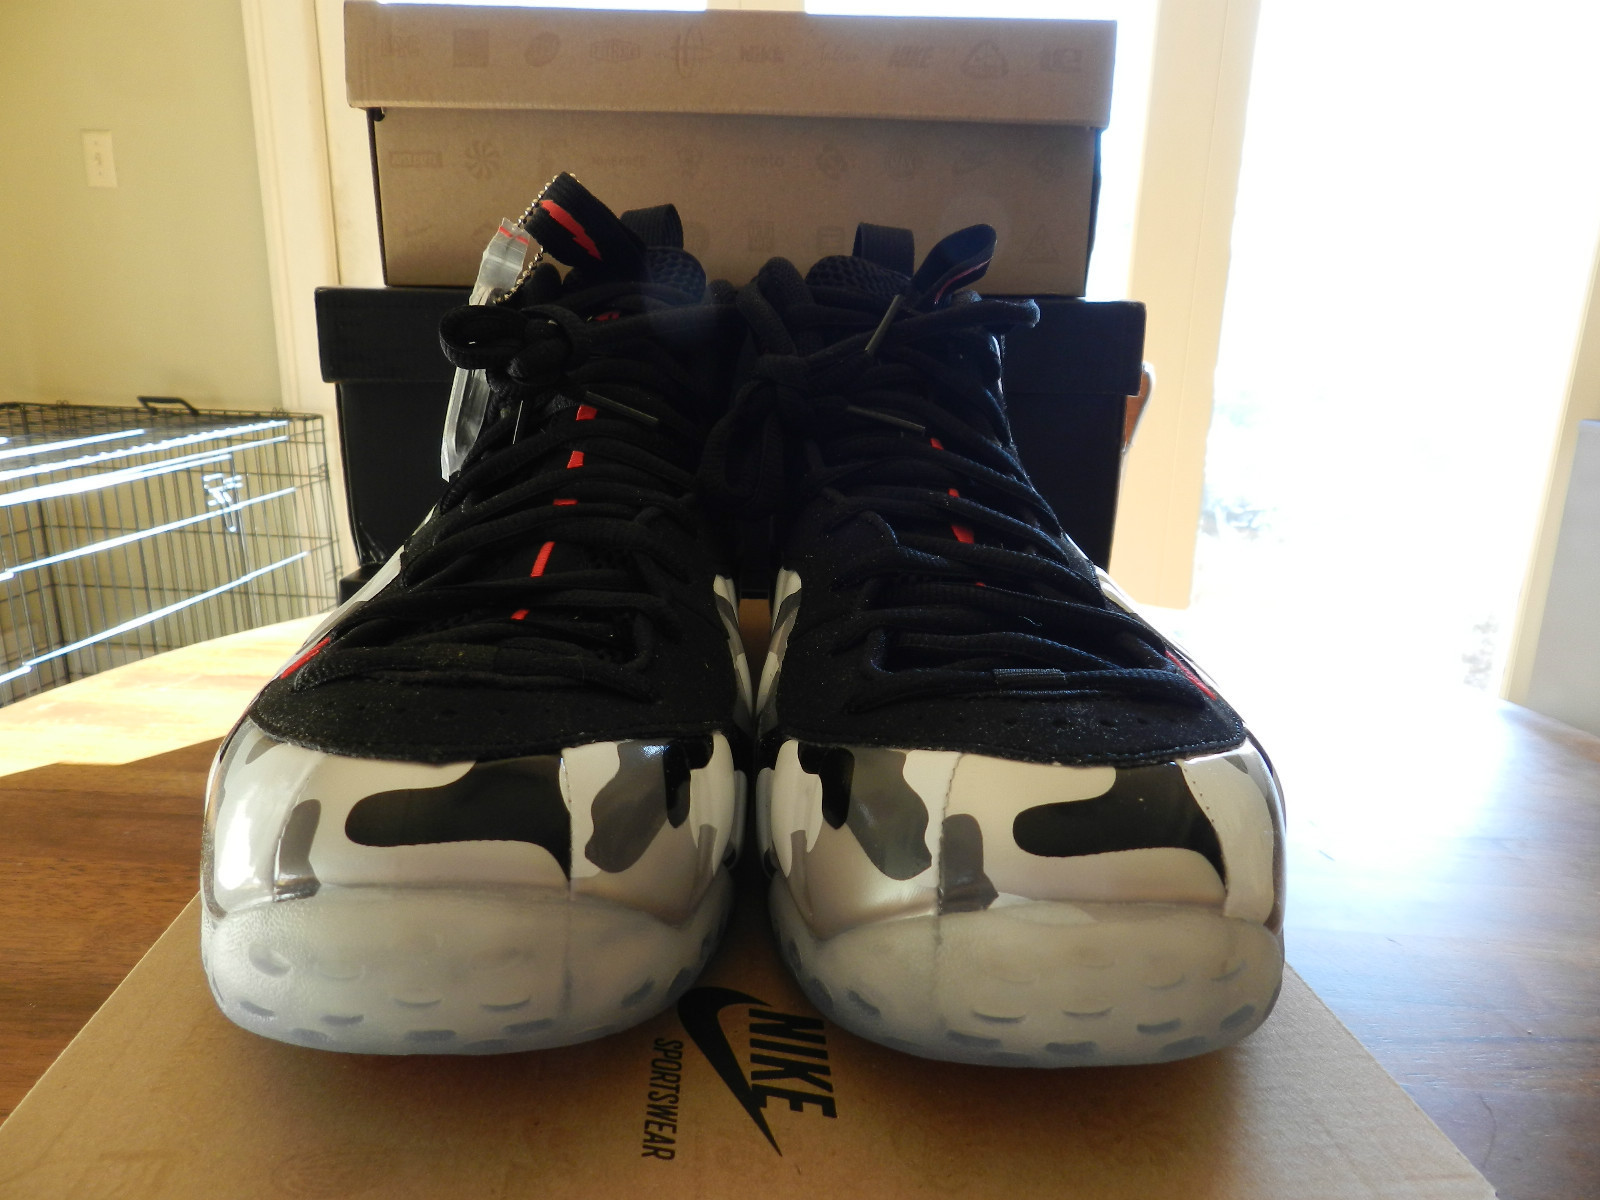 Nike Air Foamposite One Fighter Jet - Release Reminder 